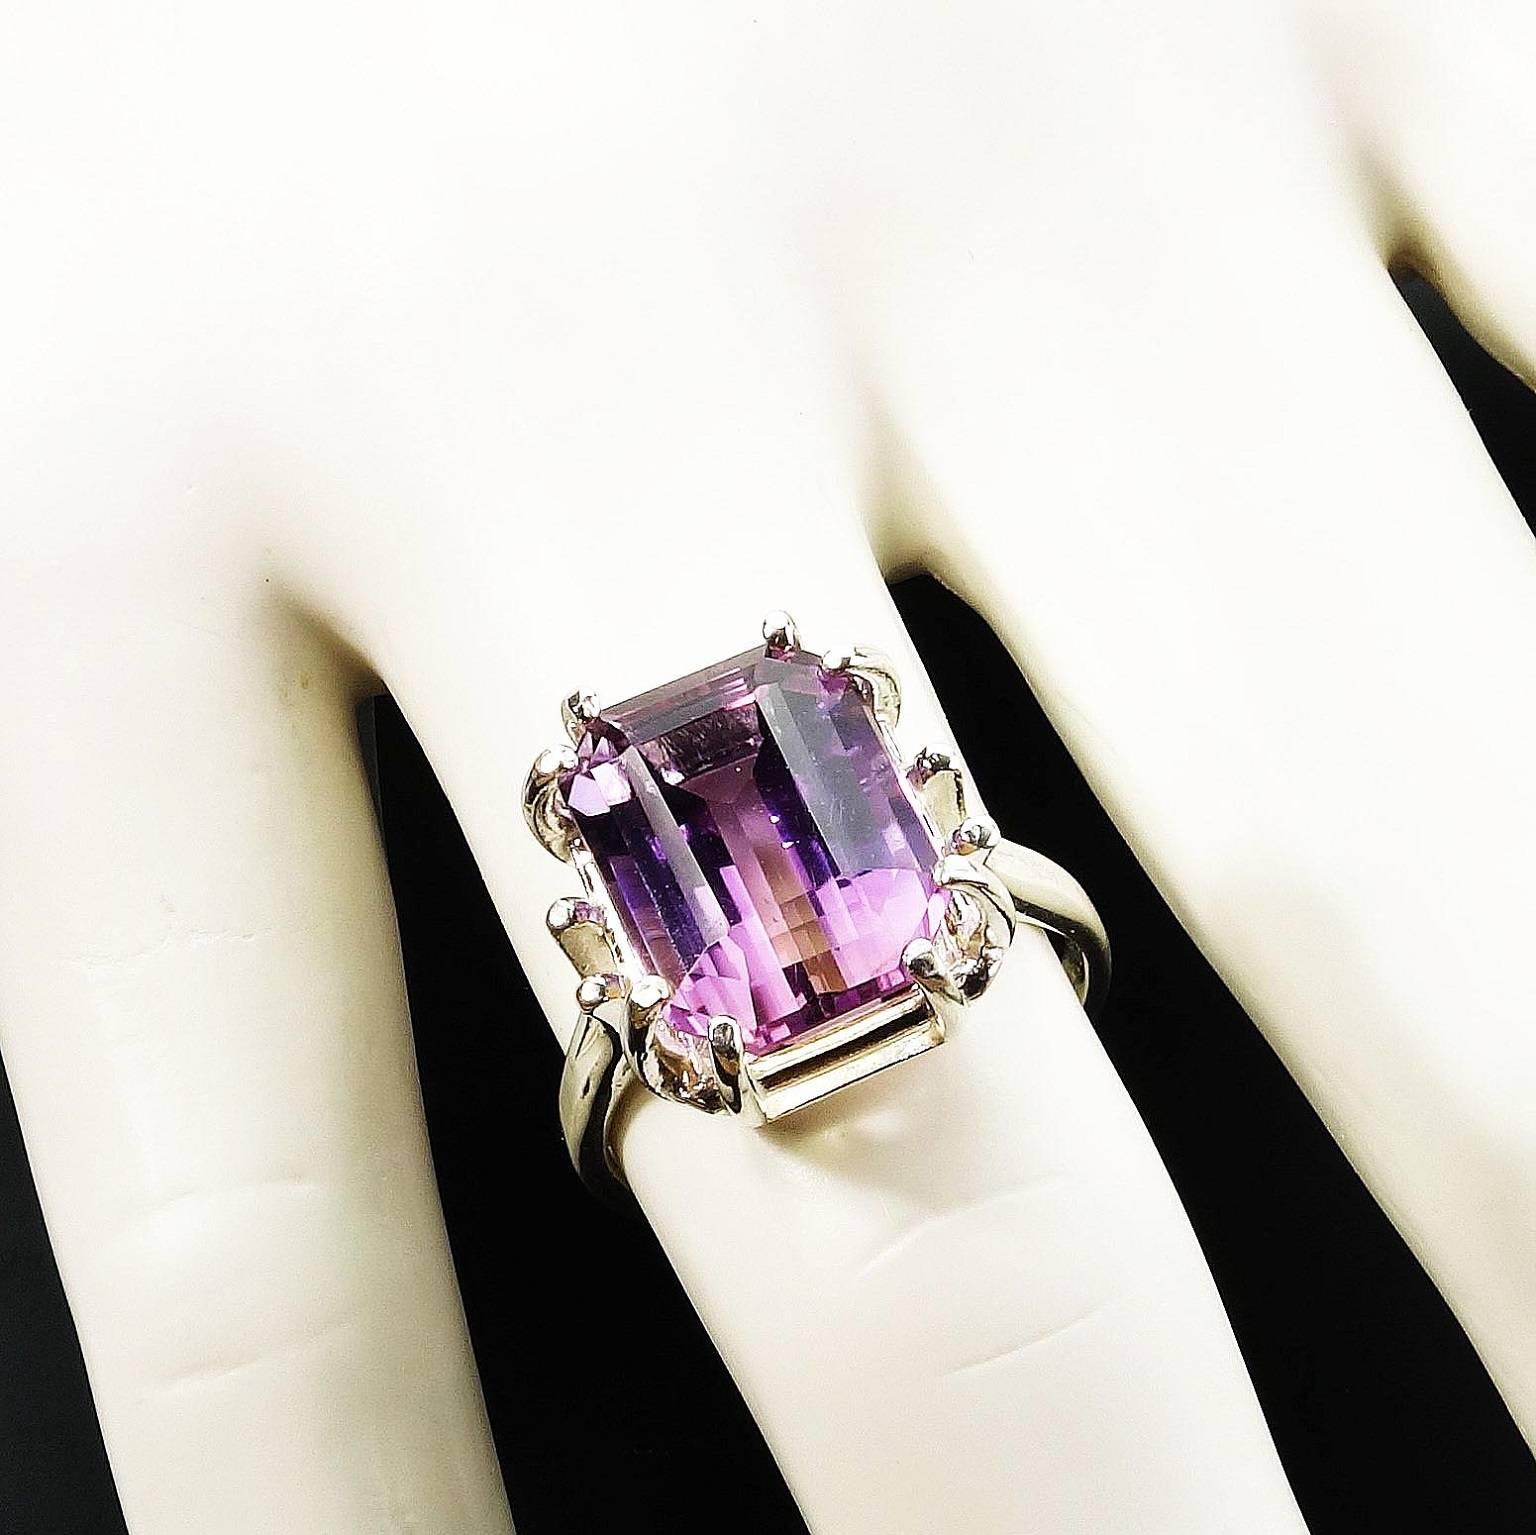 Lots of Sterling Silver enhances this lovely, custom made Brazilian Ametrine (part Amethyst and part Citrine) ring. The emerald cut Ametrine is set is a fancy eight prong setting, two at each corner, with a split shank.  Two more half prongs rise up